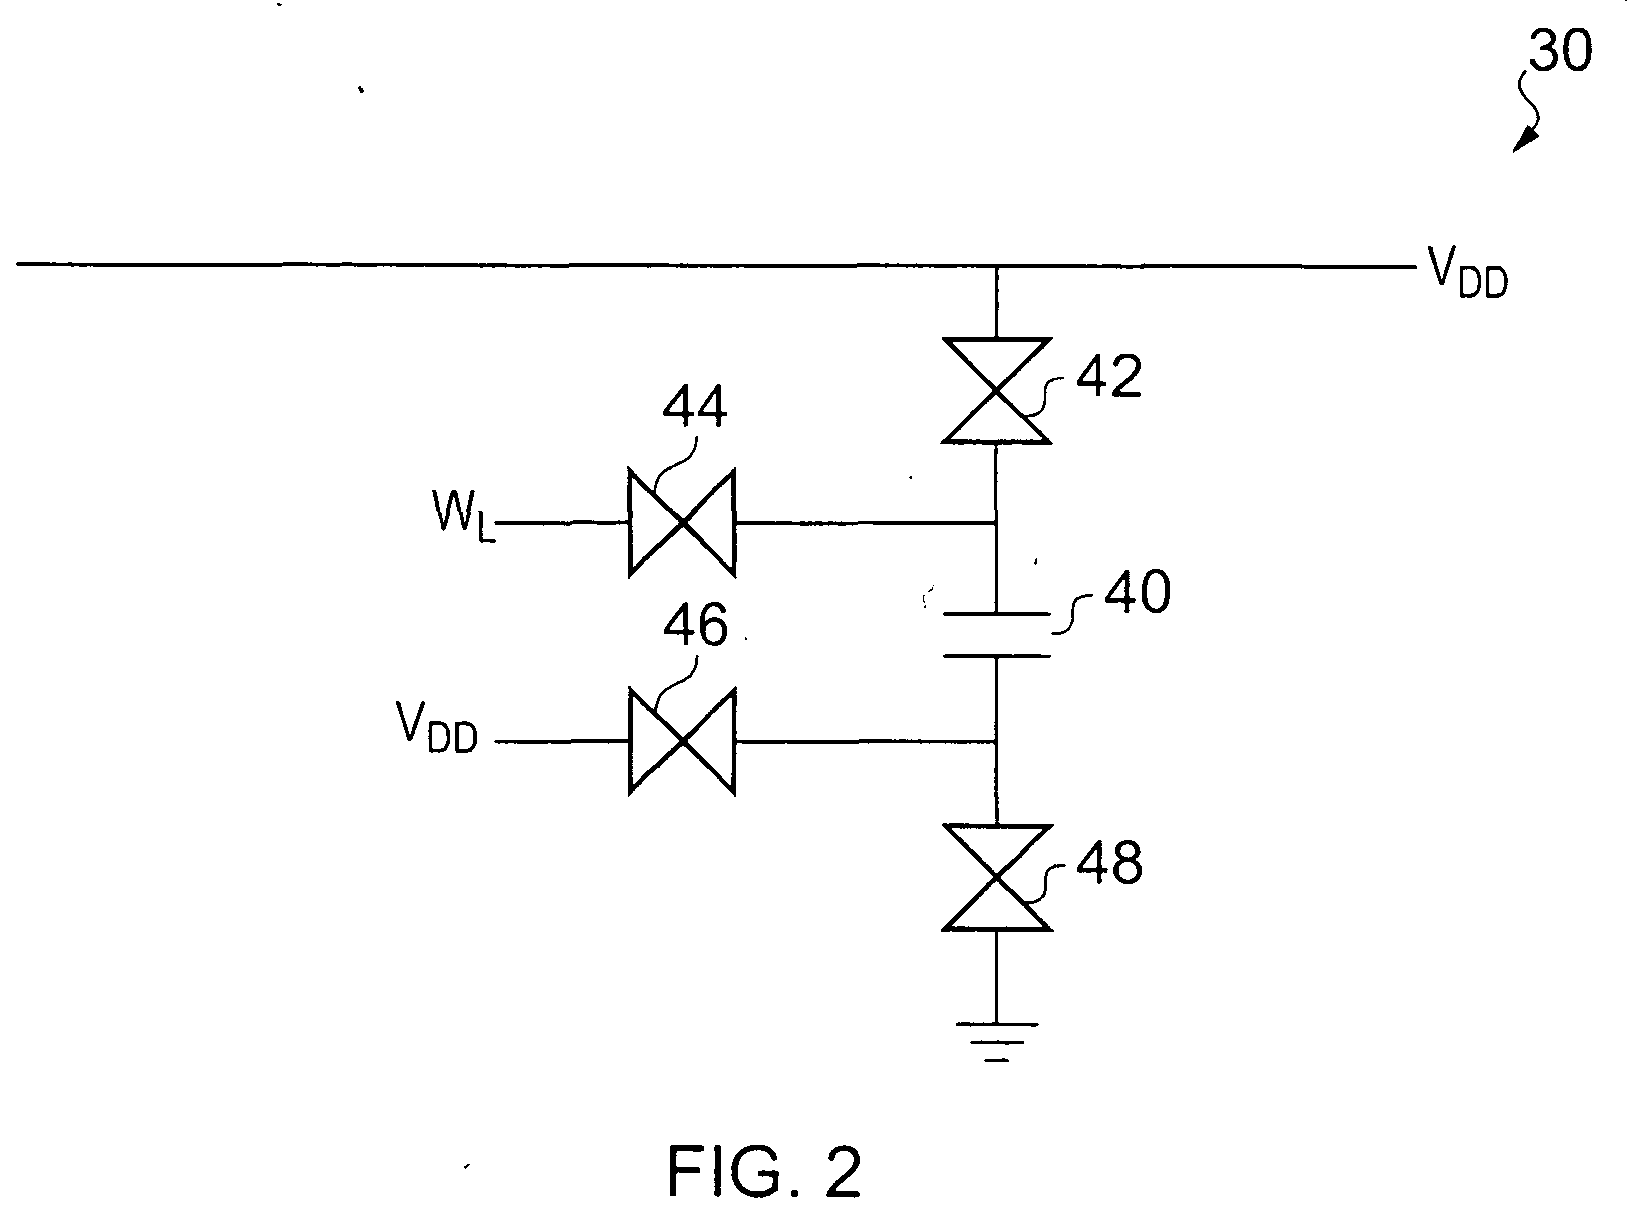 Controlling voltage levels applied to access devices when accessing storage cells in a memory